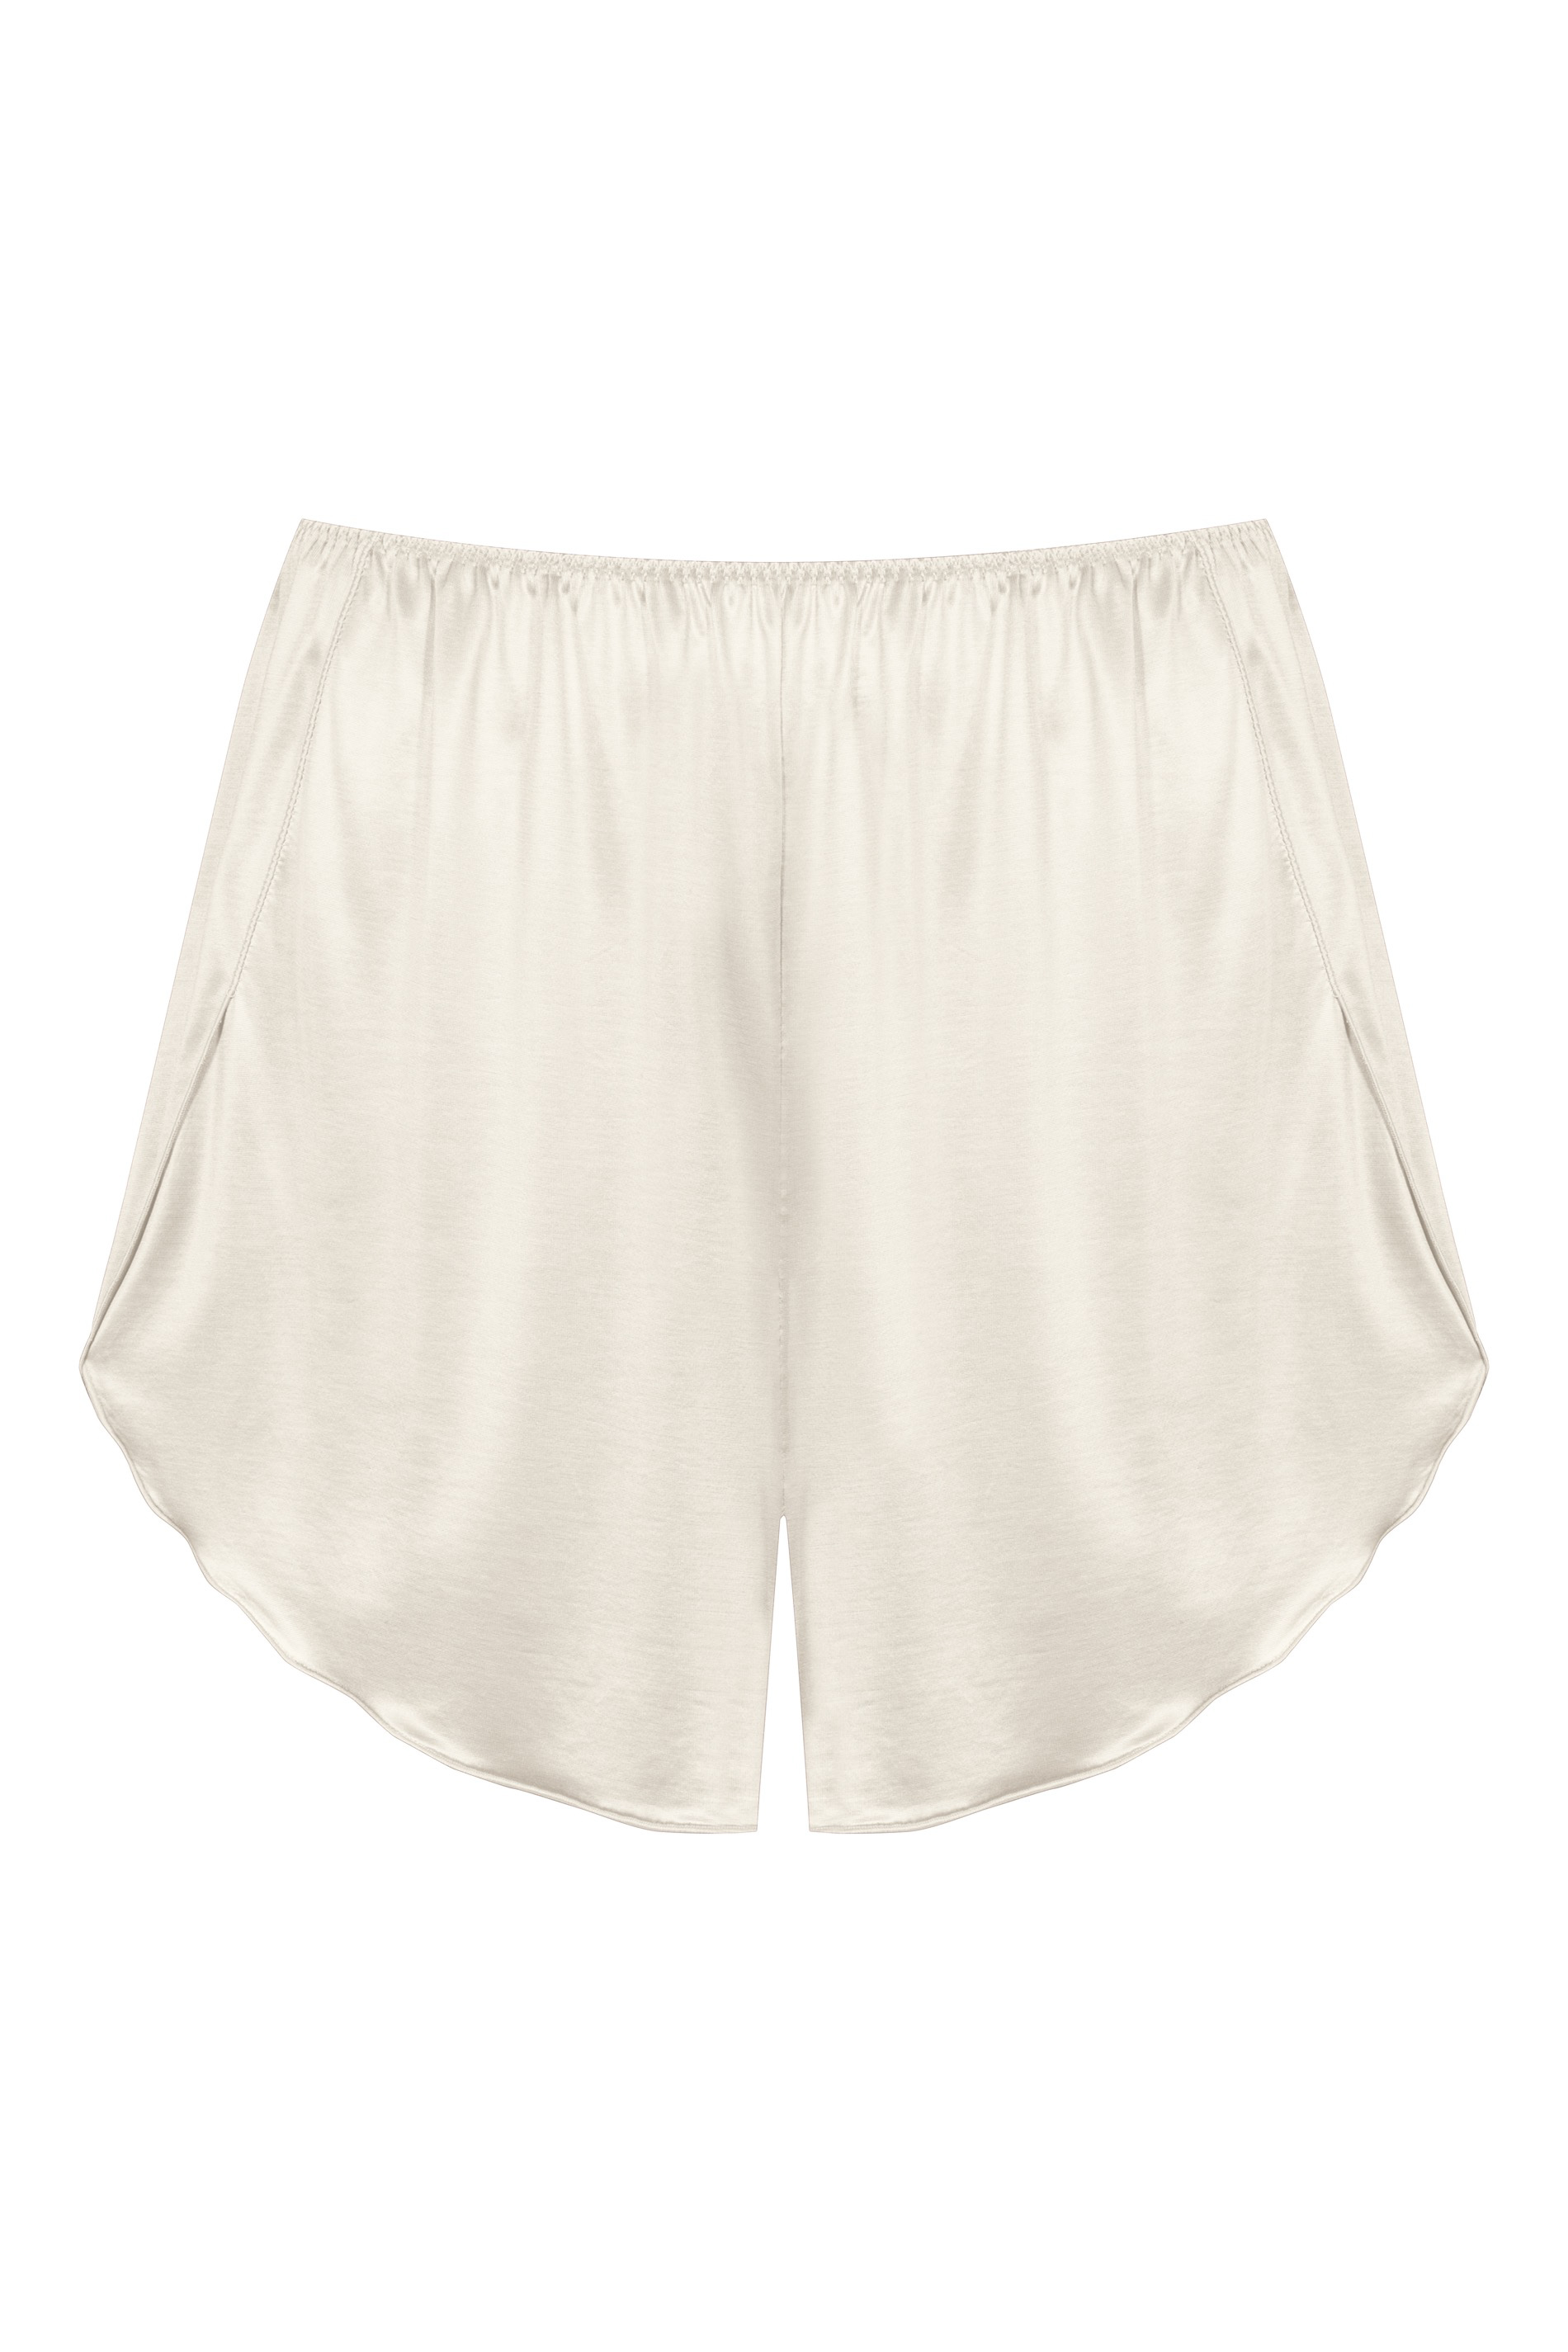 French knicker Serie Coco Uitknippen | mey®